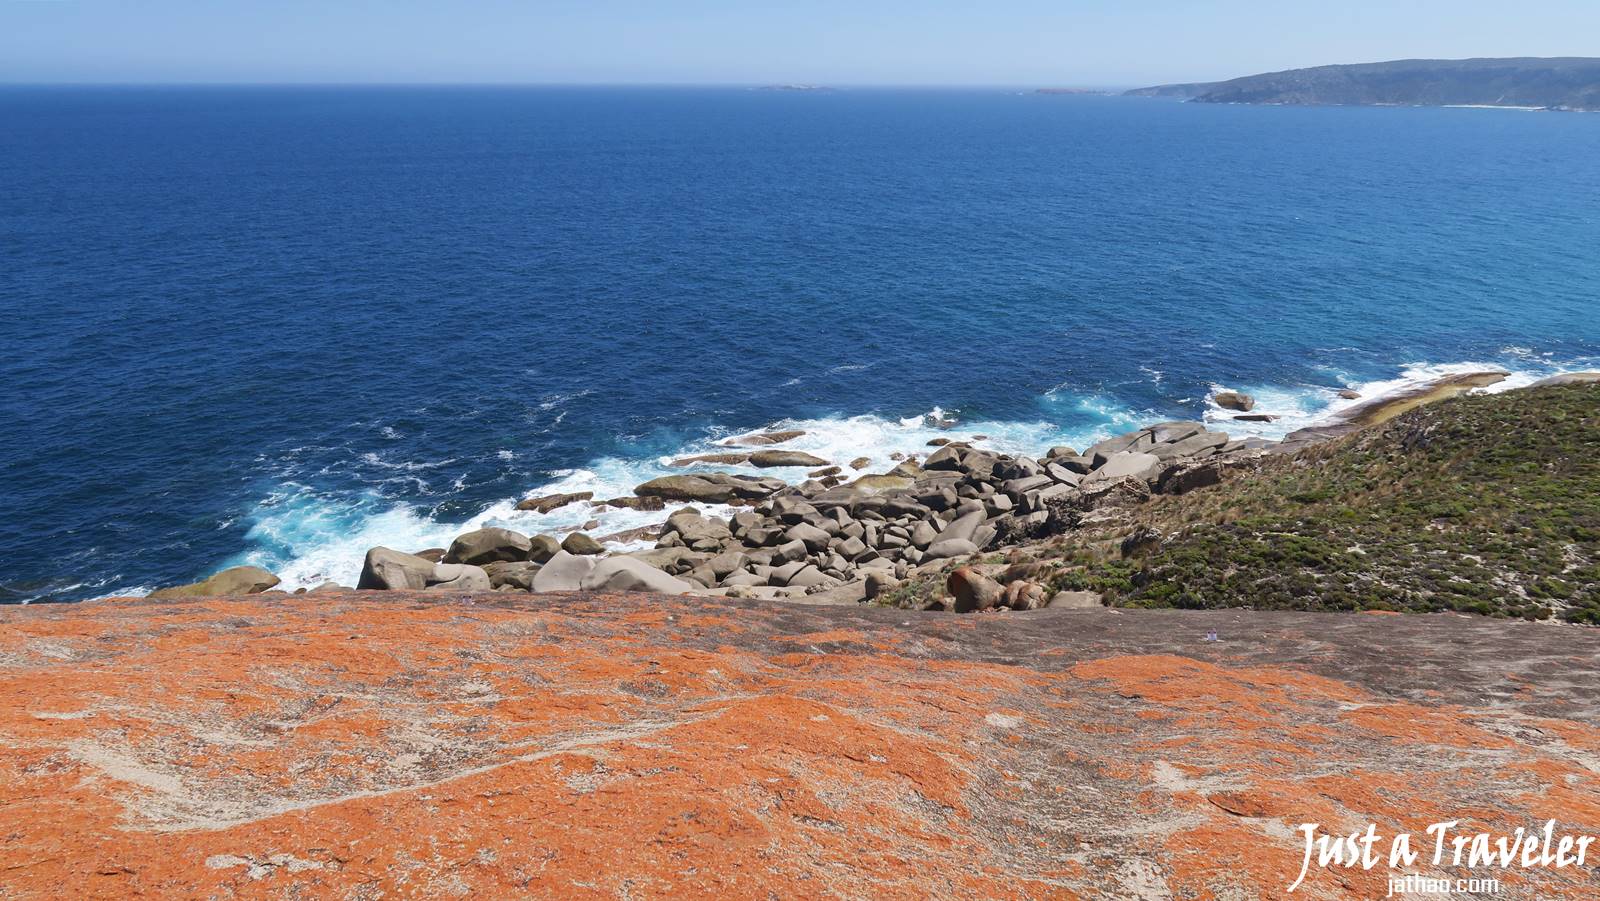 Adelaide-Kangaroo Island-Remarkable Rocks-Transportation-Ferry-Attractions-Itineraries-Recommendation-Travel Blogs-Back-Pack Travel-Independent Travel-Tour-Day Tour-Two Day Tour